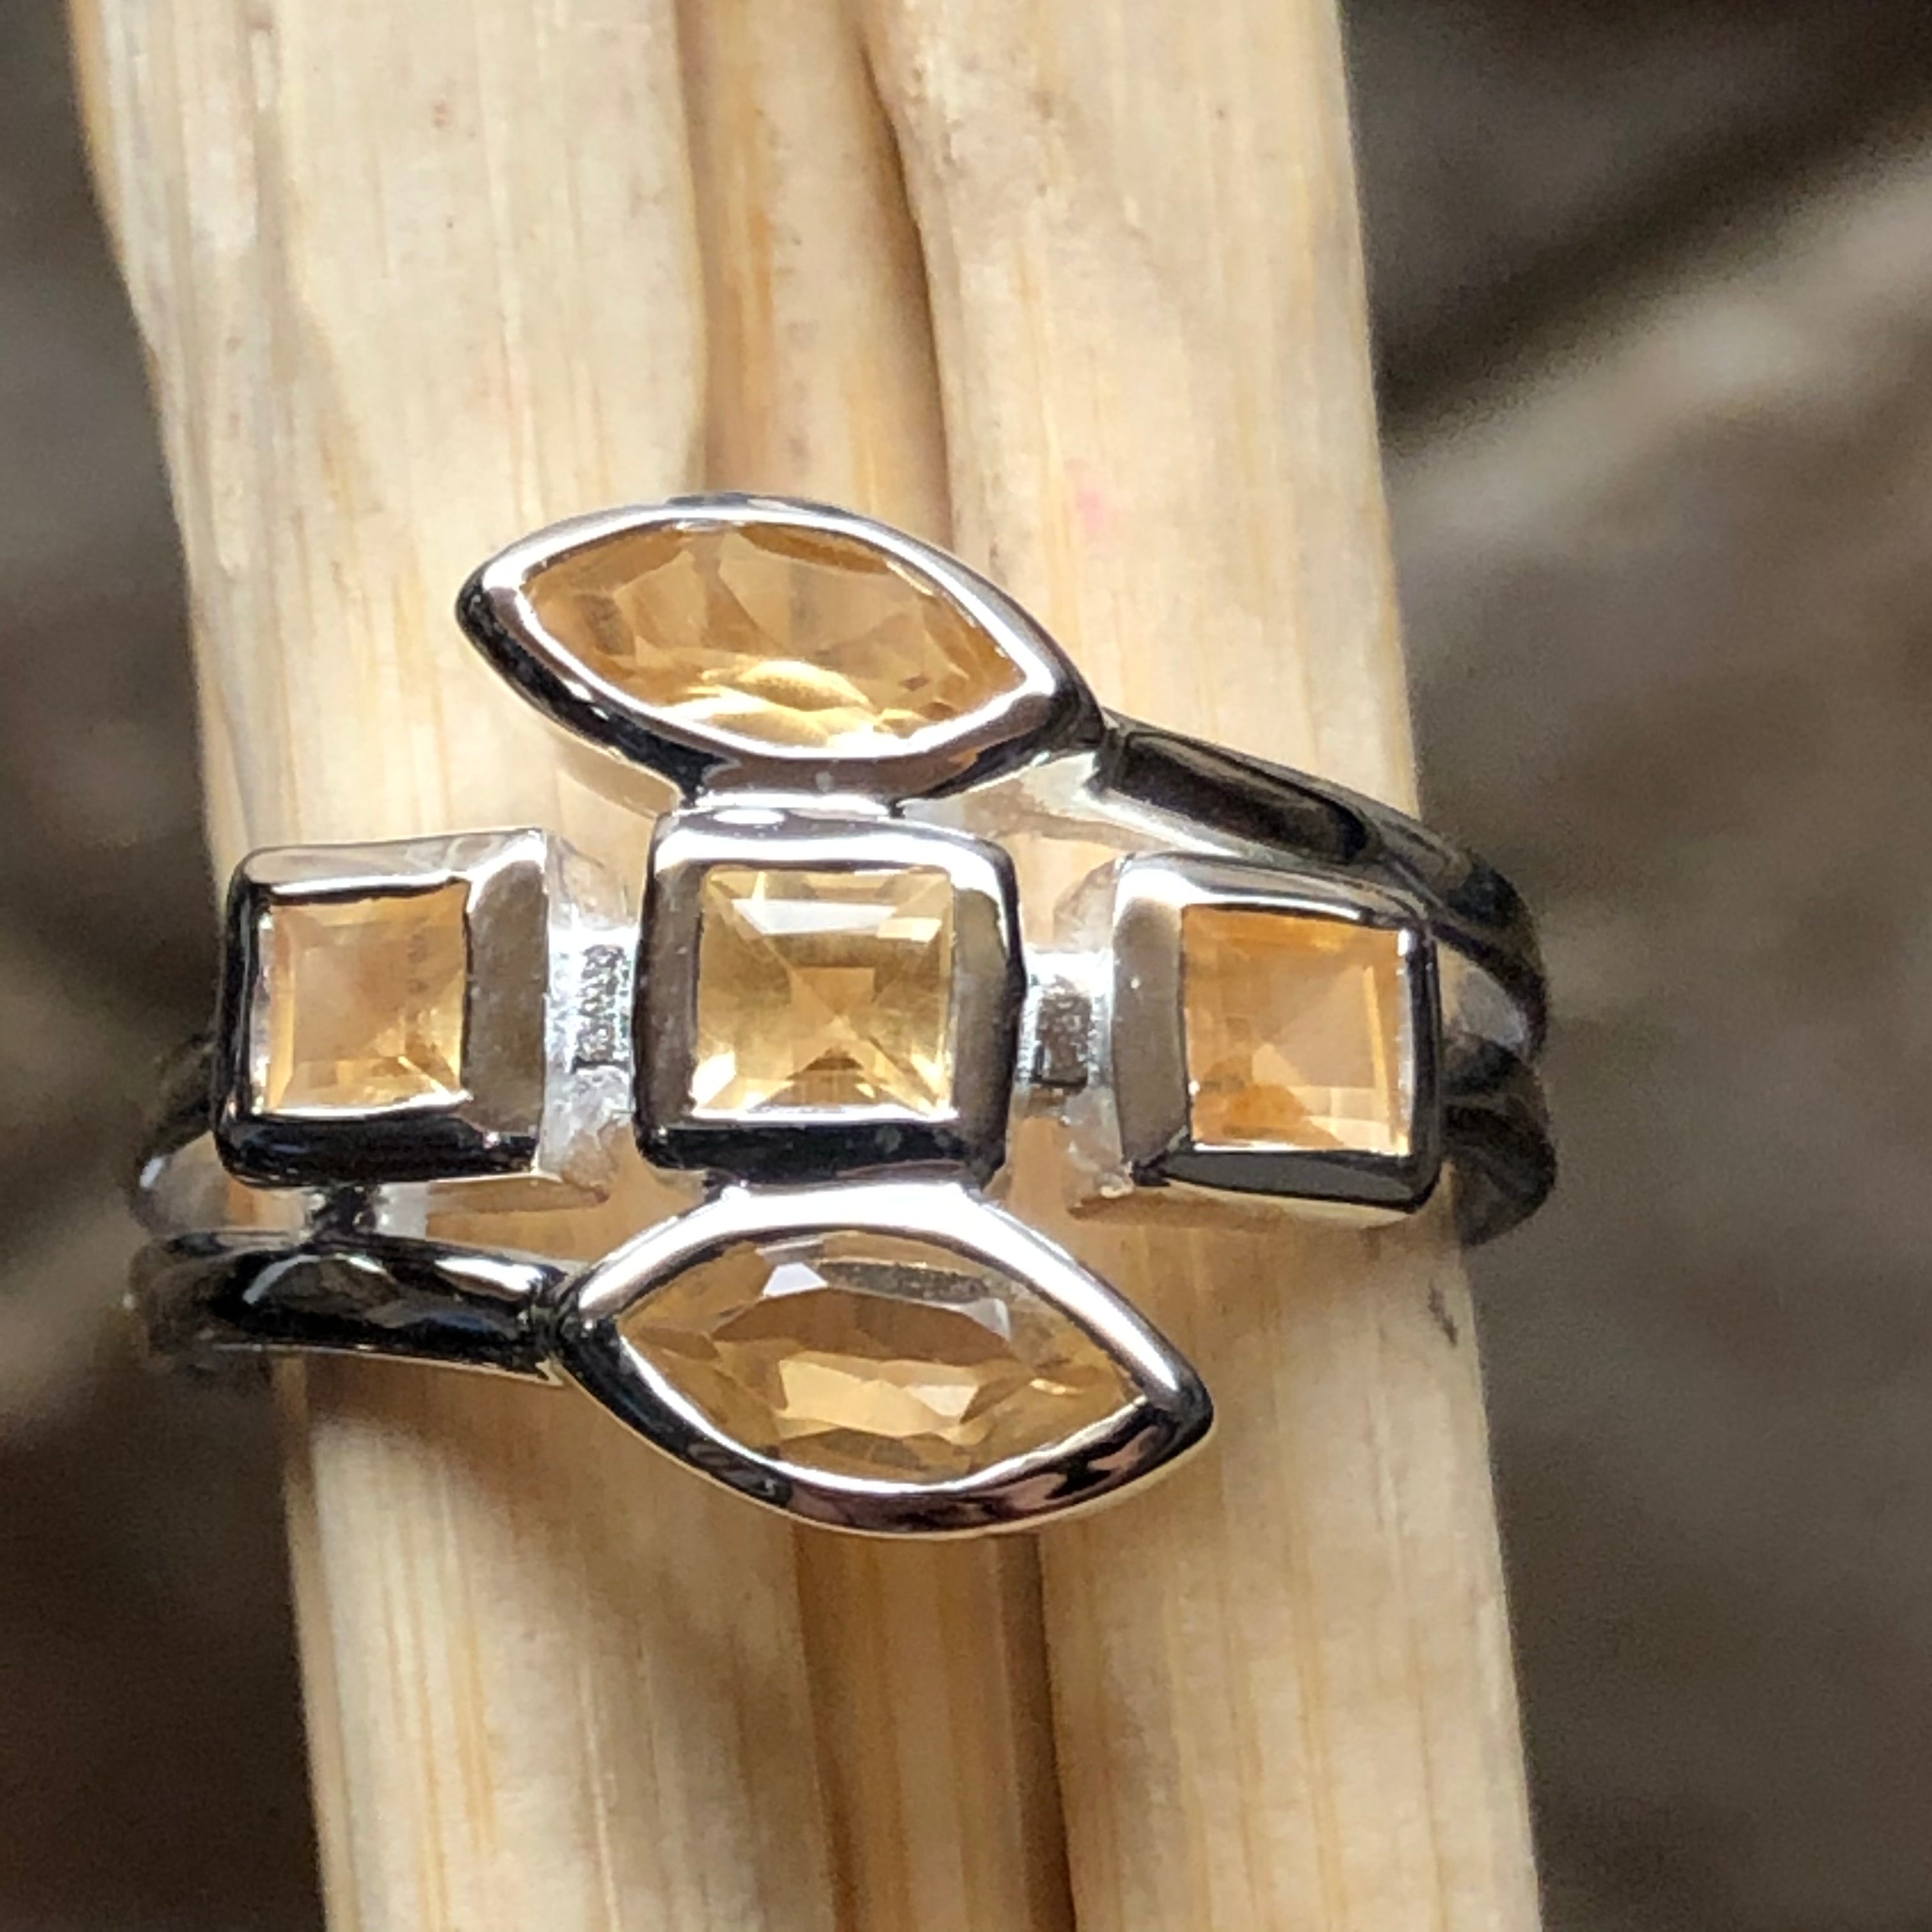 Genuine 2ct Golden Citrine 925 Solid Sterling Silver Stackable Ring Size 6, 7, 8, 9 - Natural Rocks by Kala